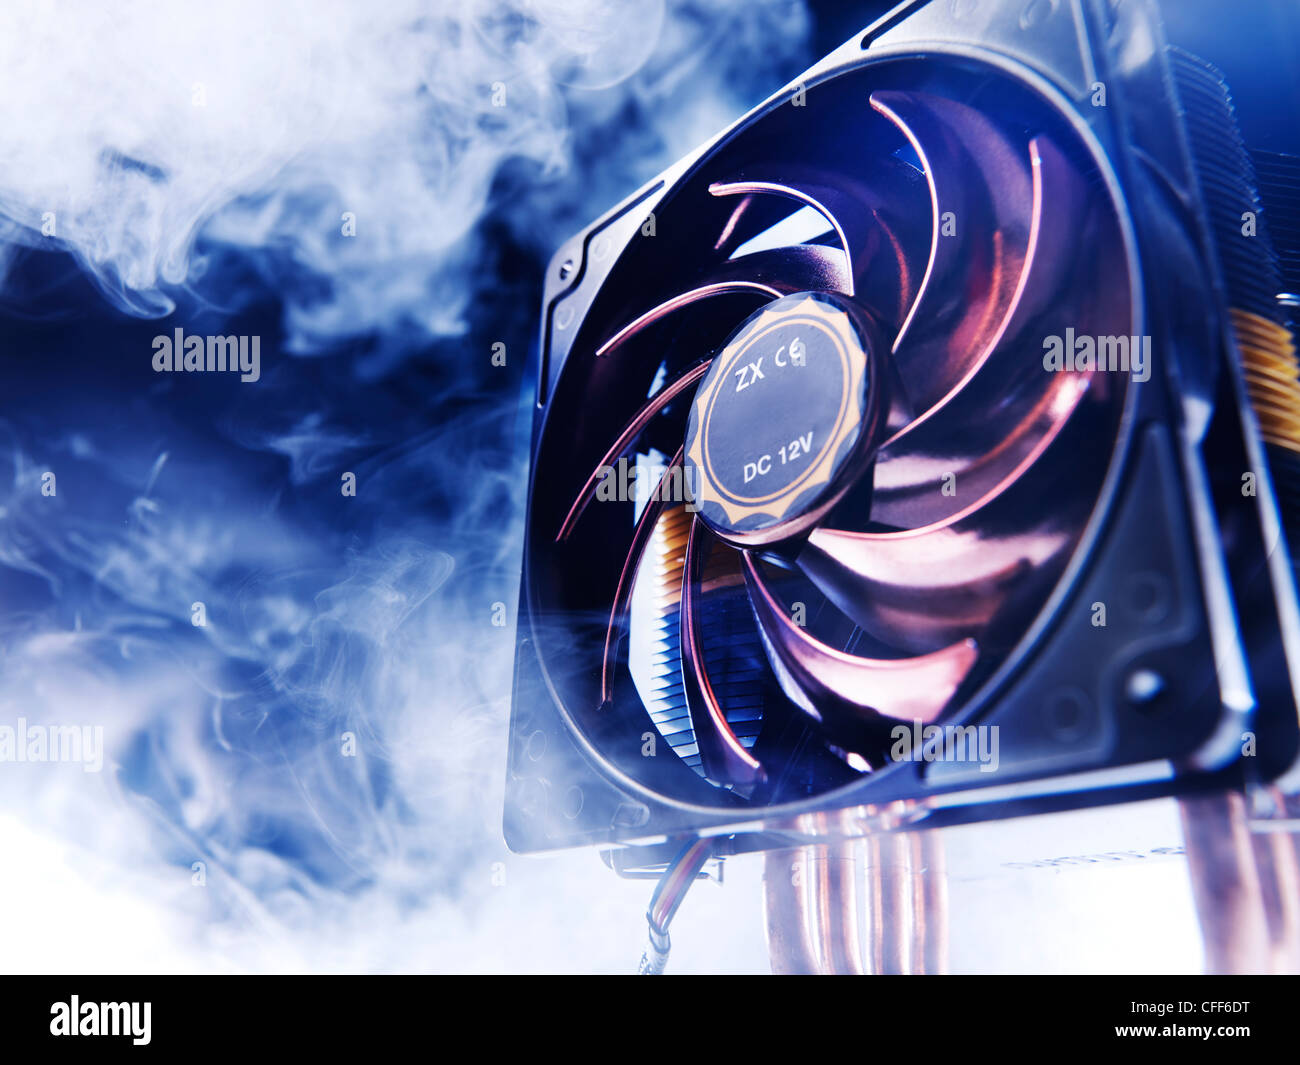 Epic pc cooling fan in dry ice smoke Stock Photo